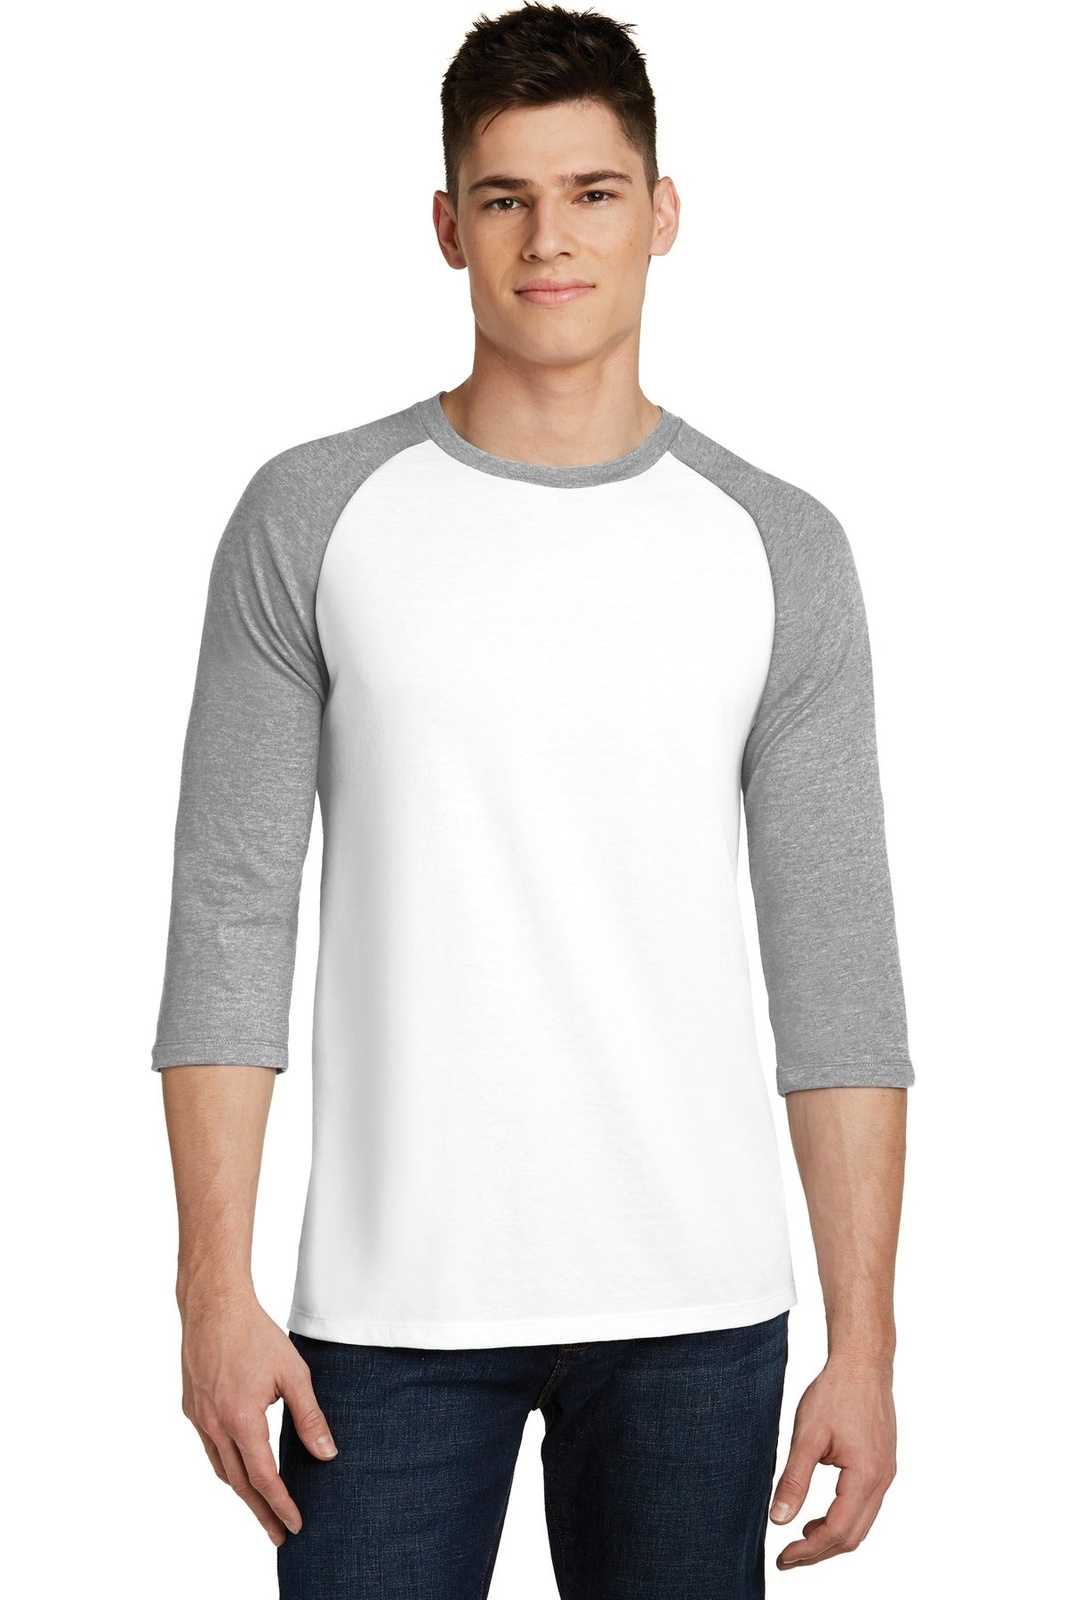 District DT6210 Very Important Tee 3/4-Sleeve Raglan - Light Heather Gray White - HIT a Double - 1